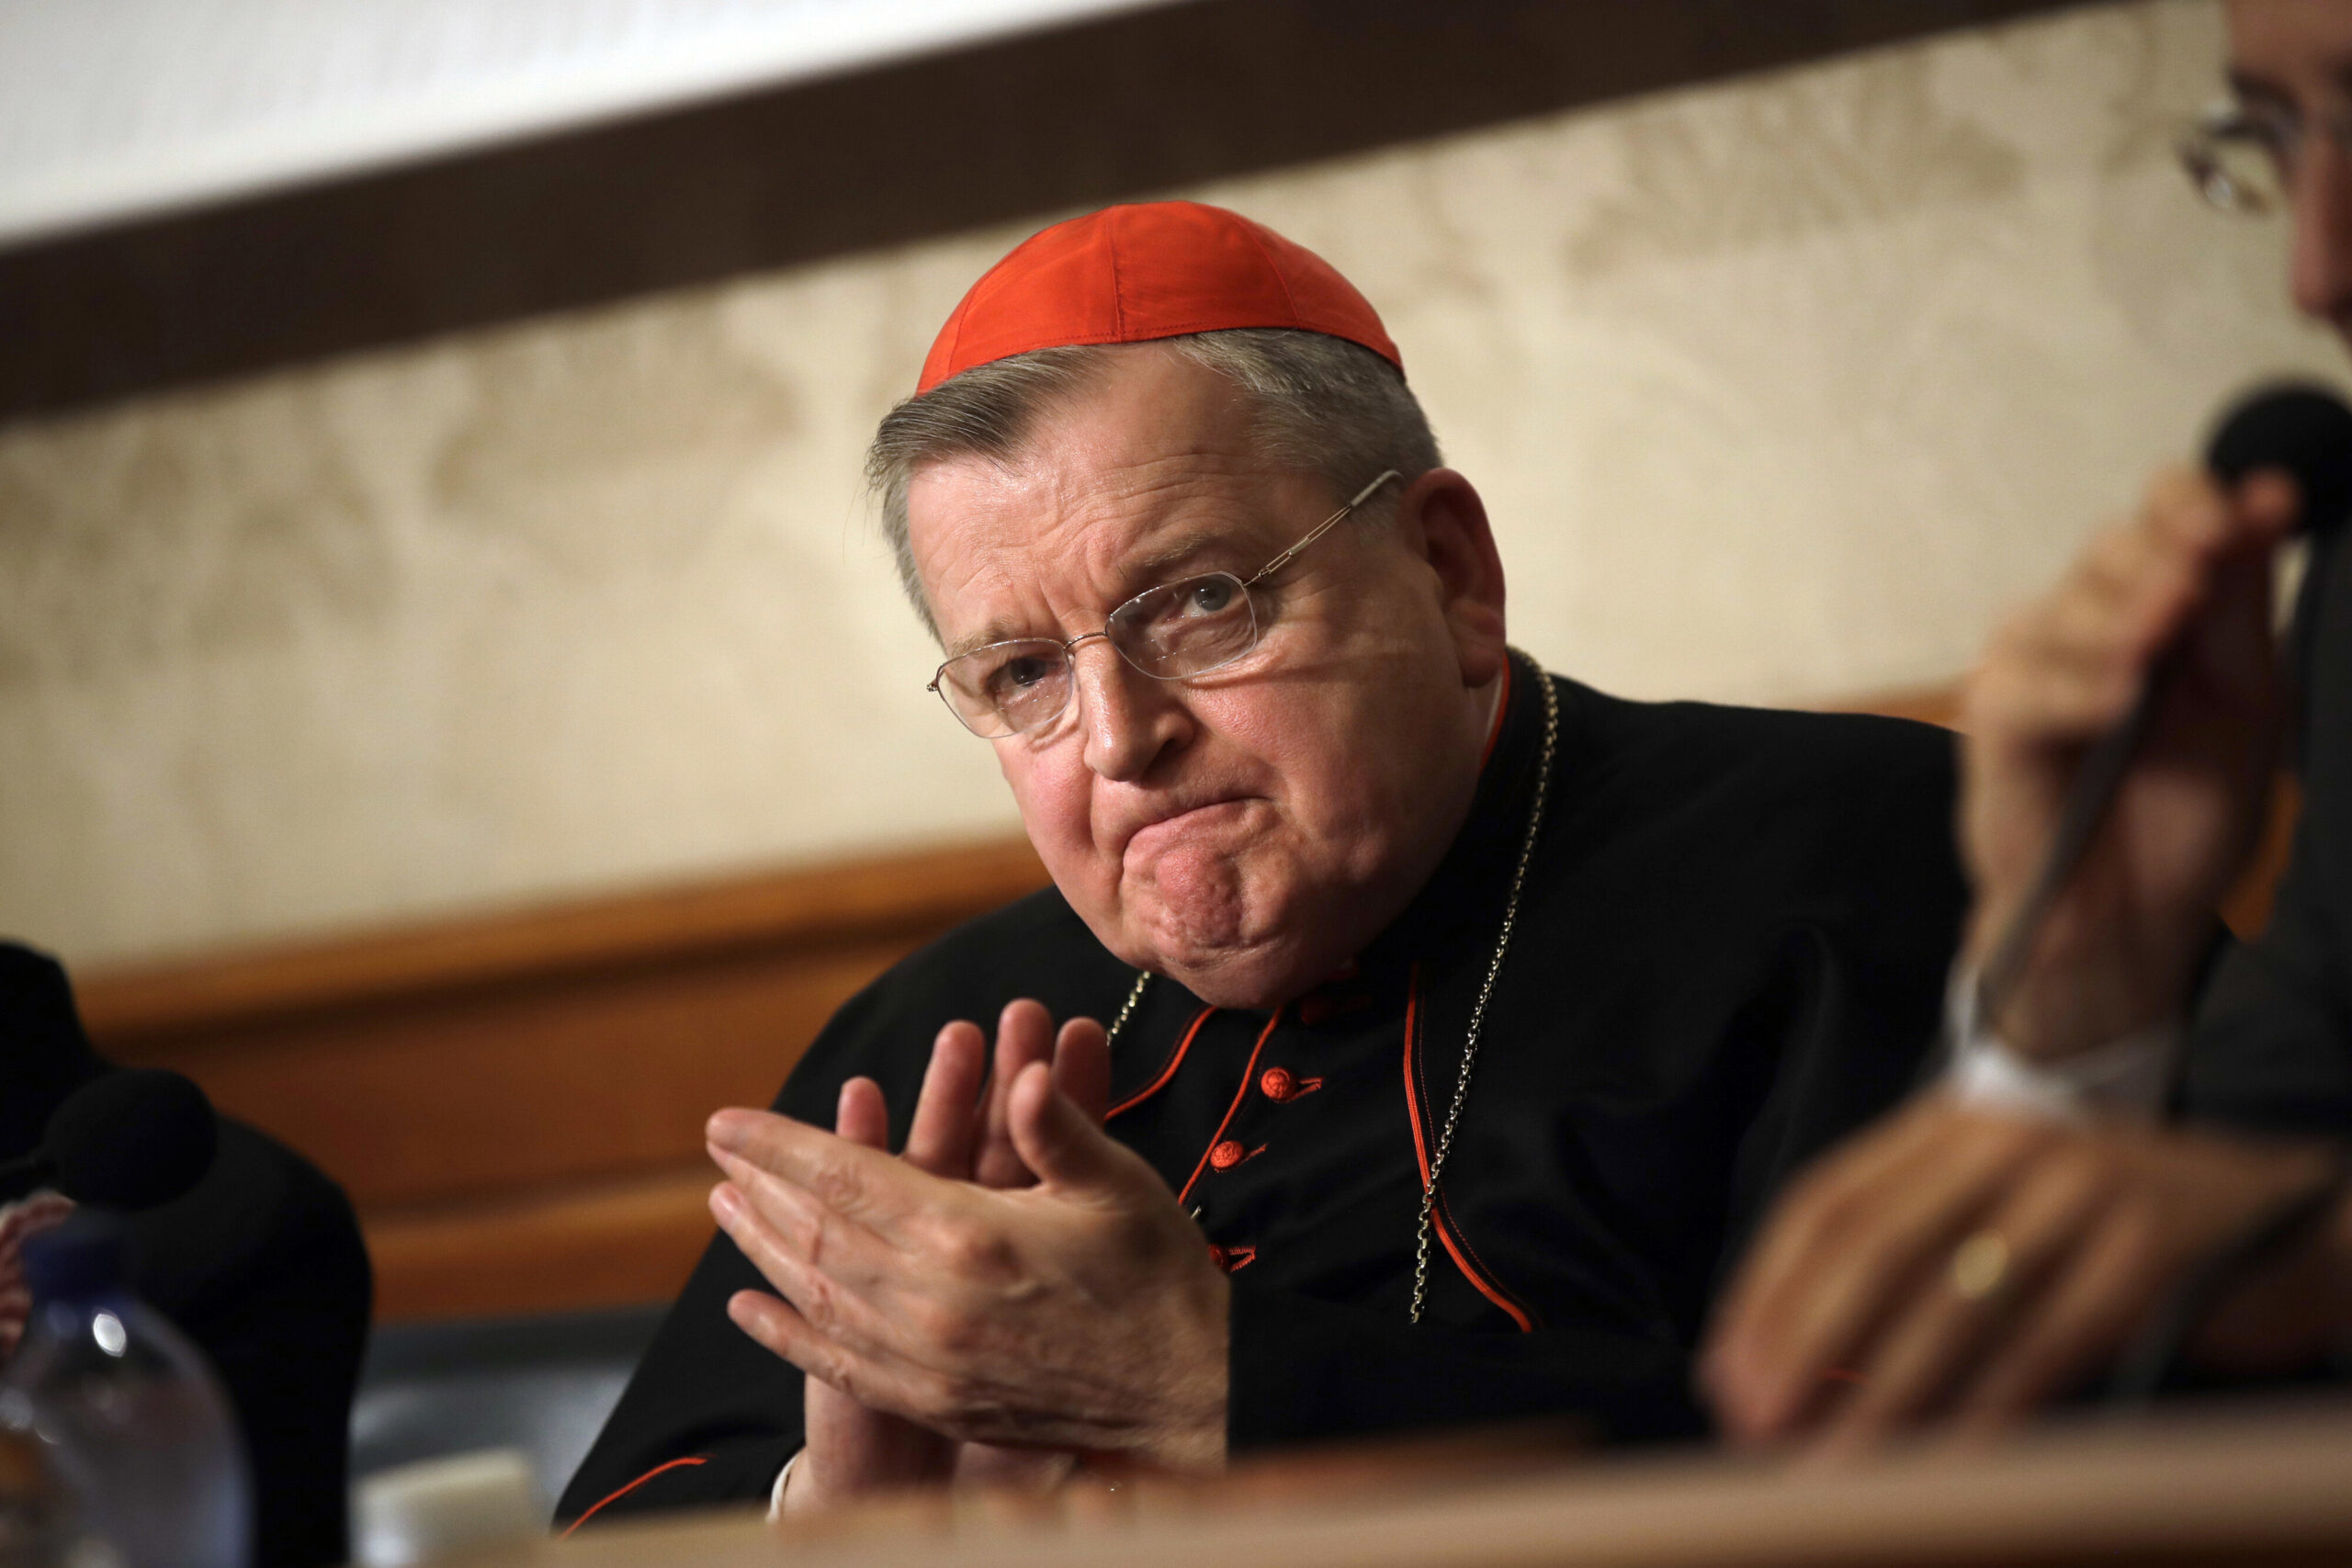 Wisconsin Catholics say pope’s punishment of Cardinal Burke follows years of conflict